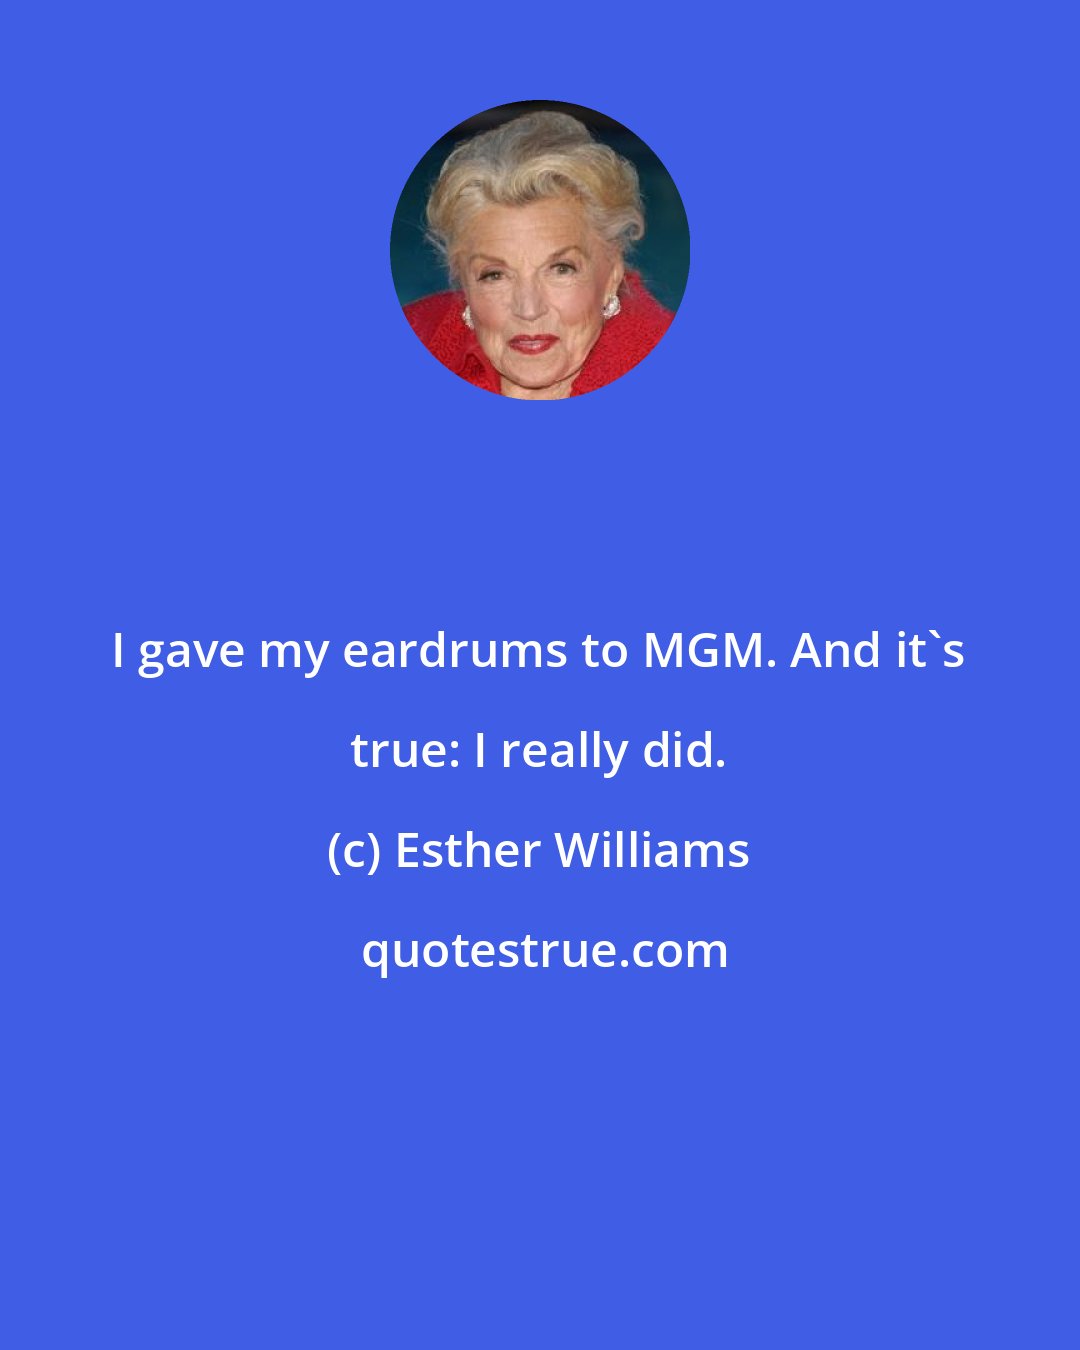 Esther Williams: I gave my eardrums to MGM. And it's true: I really did.